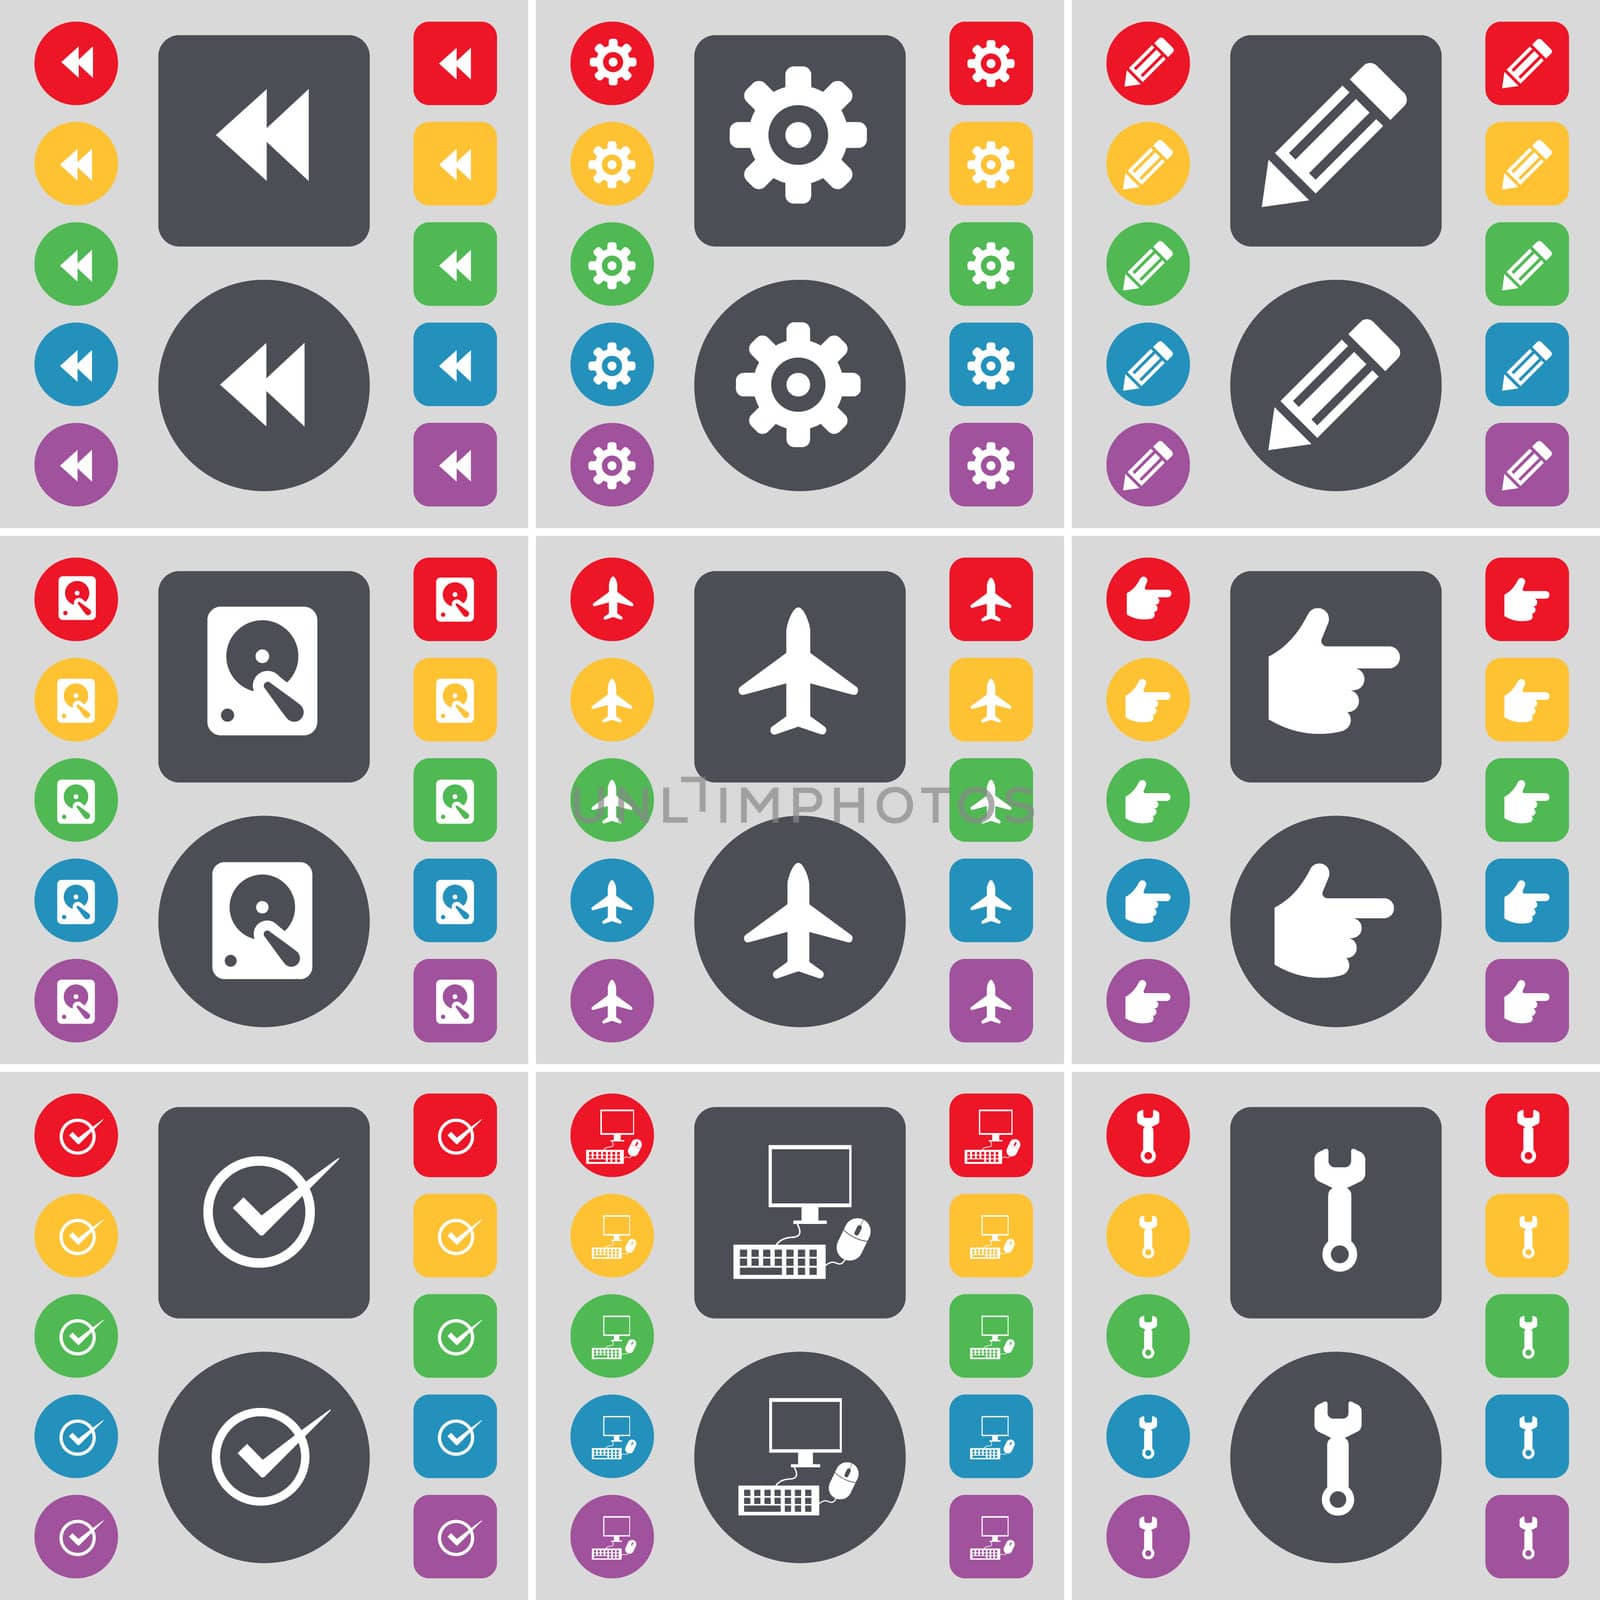 Rewind, Gear, Pencil, Hard drive, Airplane, Hand, Tick, PC, Wrench icon symbol. A large set of flat, colored buttons for your design.  by serhii_lohvyniuk